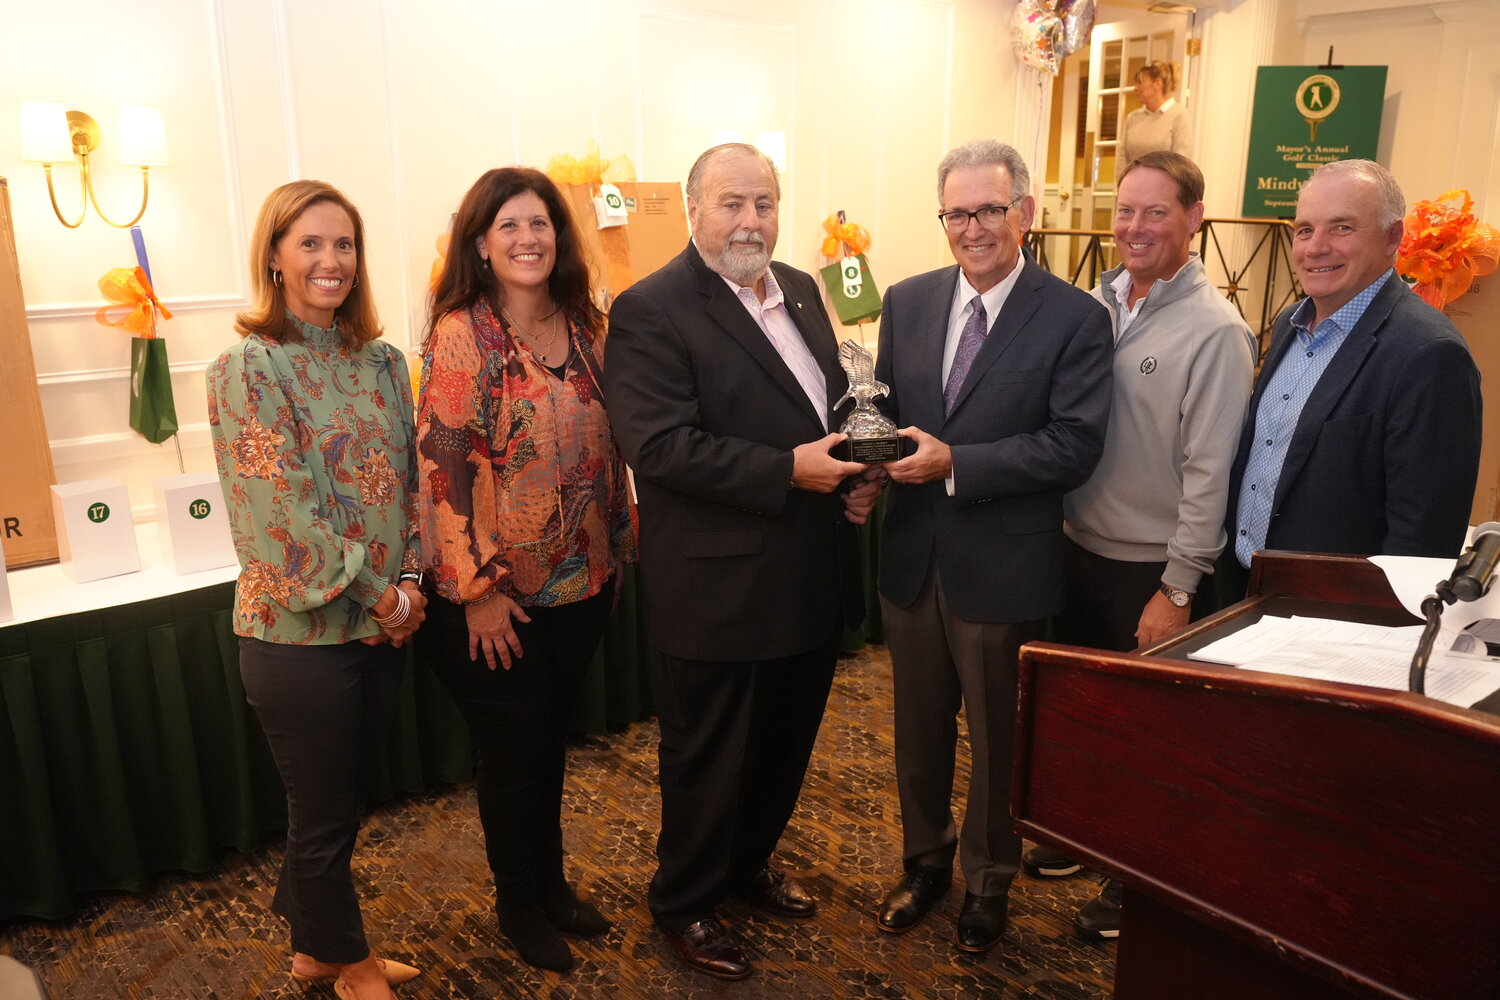 Rockville Centre Mayor Francis Murray, center, presents the Eugene J. Murray Outstanding Service Award to Wayne Lipton during the 36th annual Golf and Dinner Classic on Thursday evening. Joining them are Village Trustee Katie Conlon, left, Deputy Mayor Kathy Baxley, Village Trustee Greg Shaughnessy, second from right, and Village Trustee Emilio Grillo.